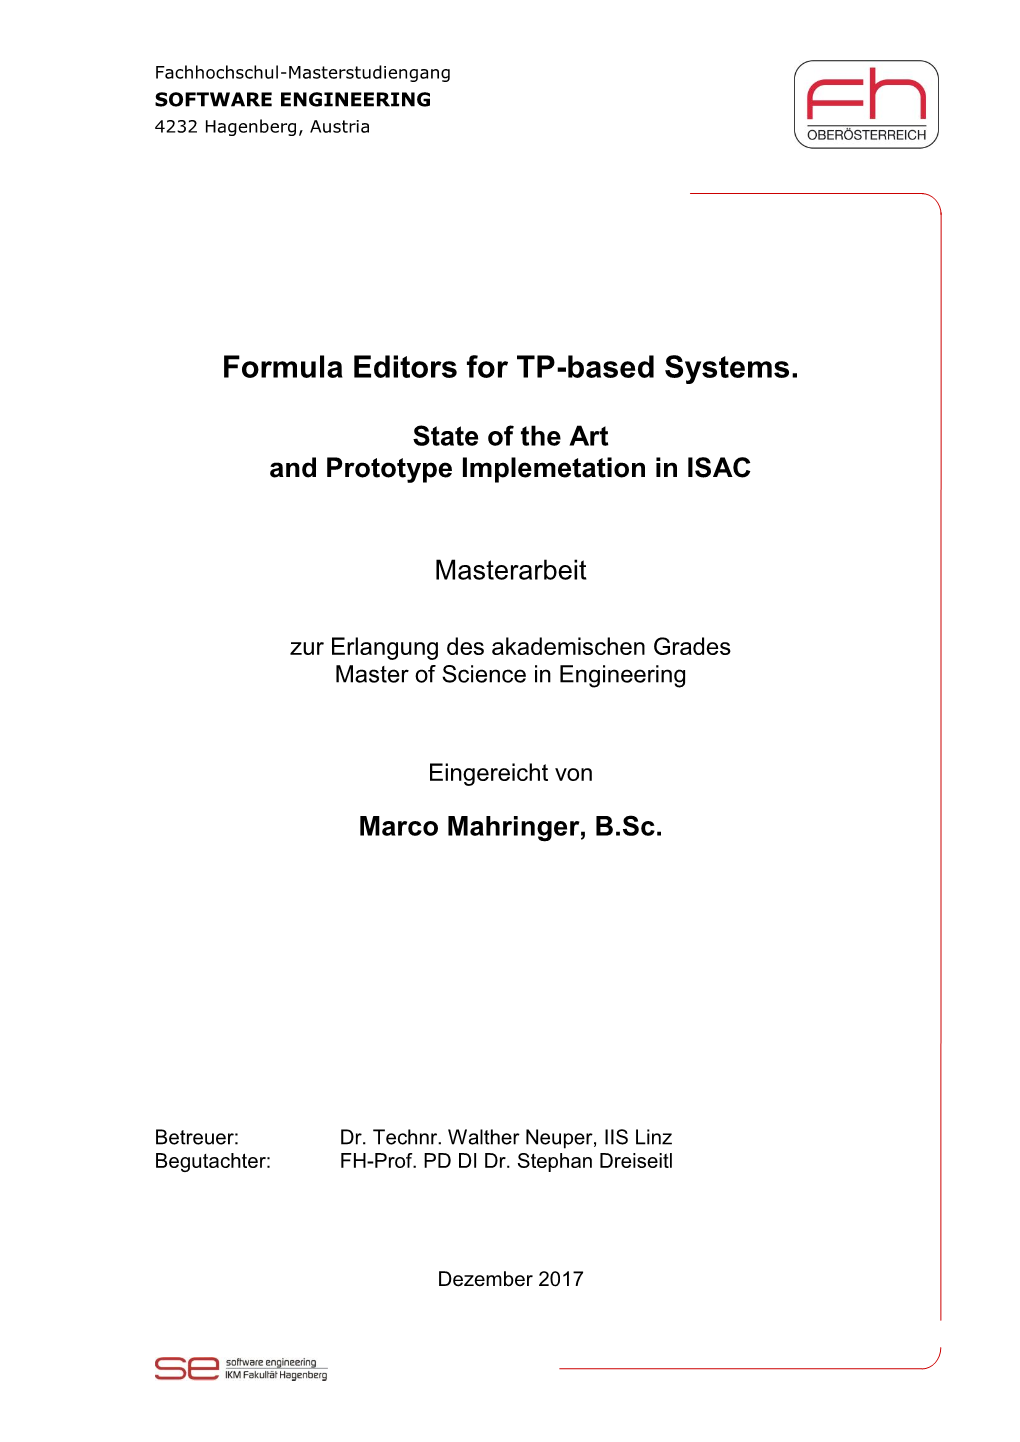 Formula Editors for TP-Based Systems